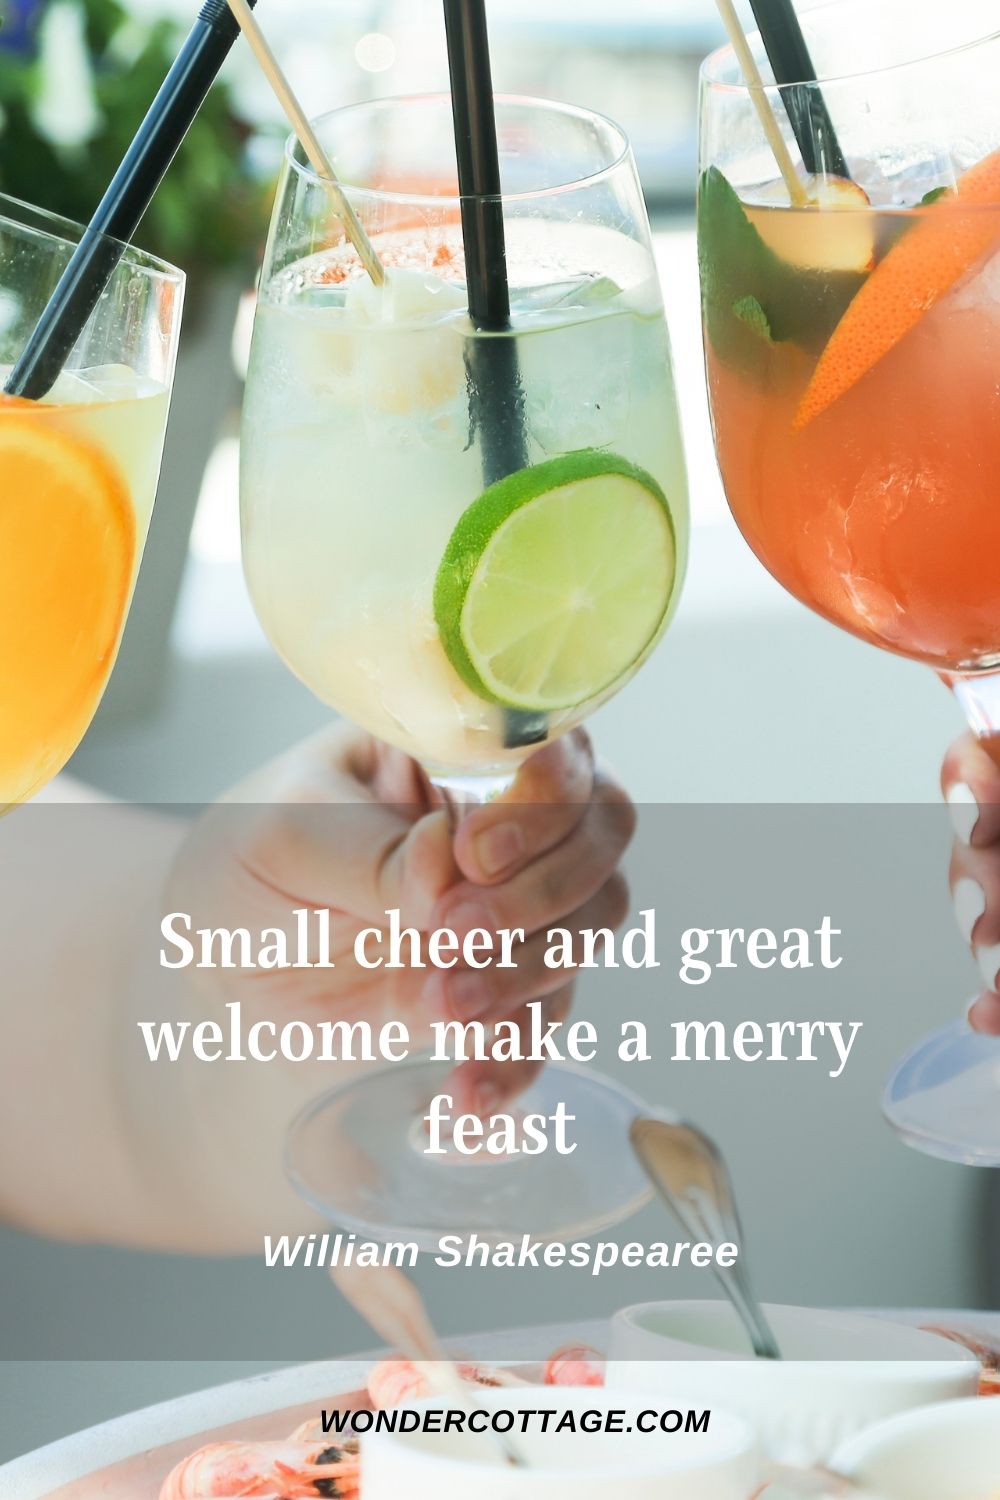 Small cheer and great welcome make a merry feast William Shakespeare